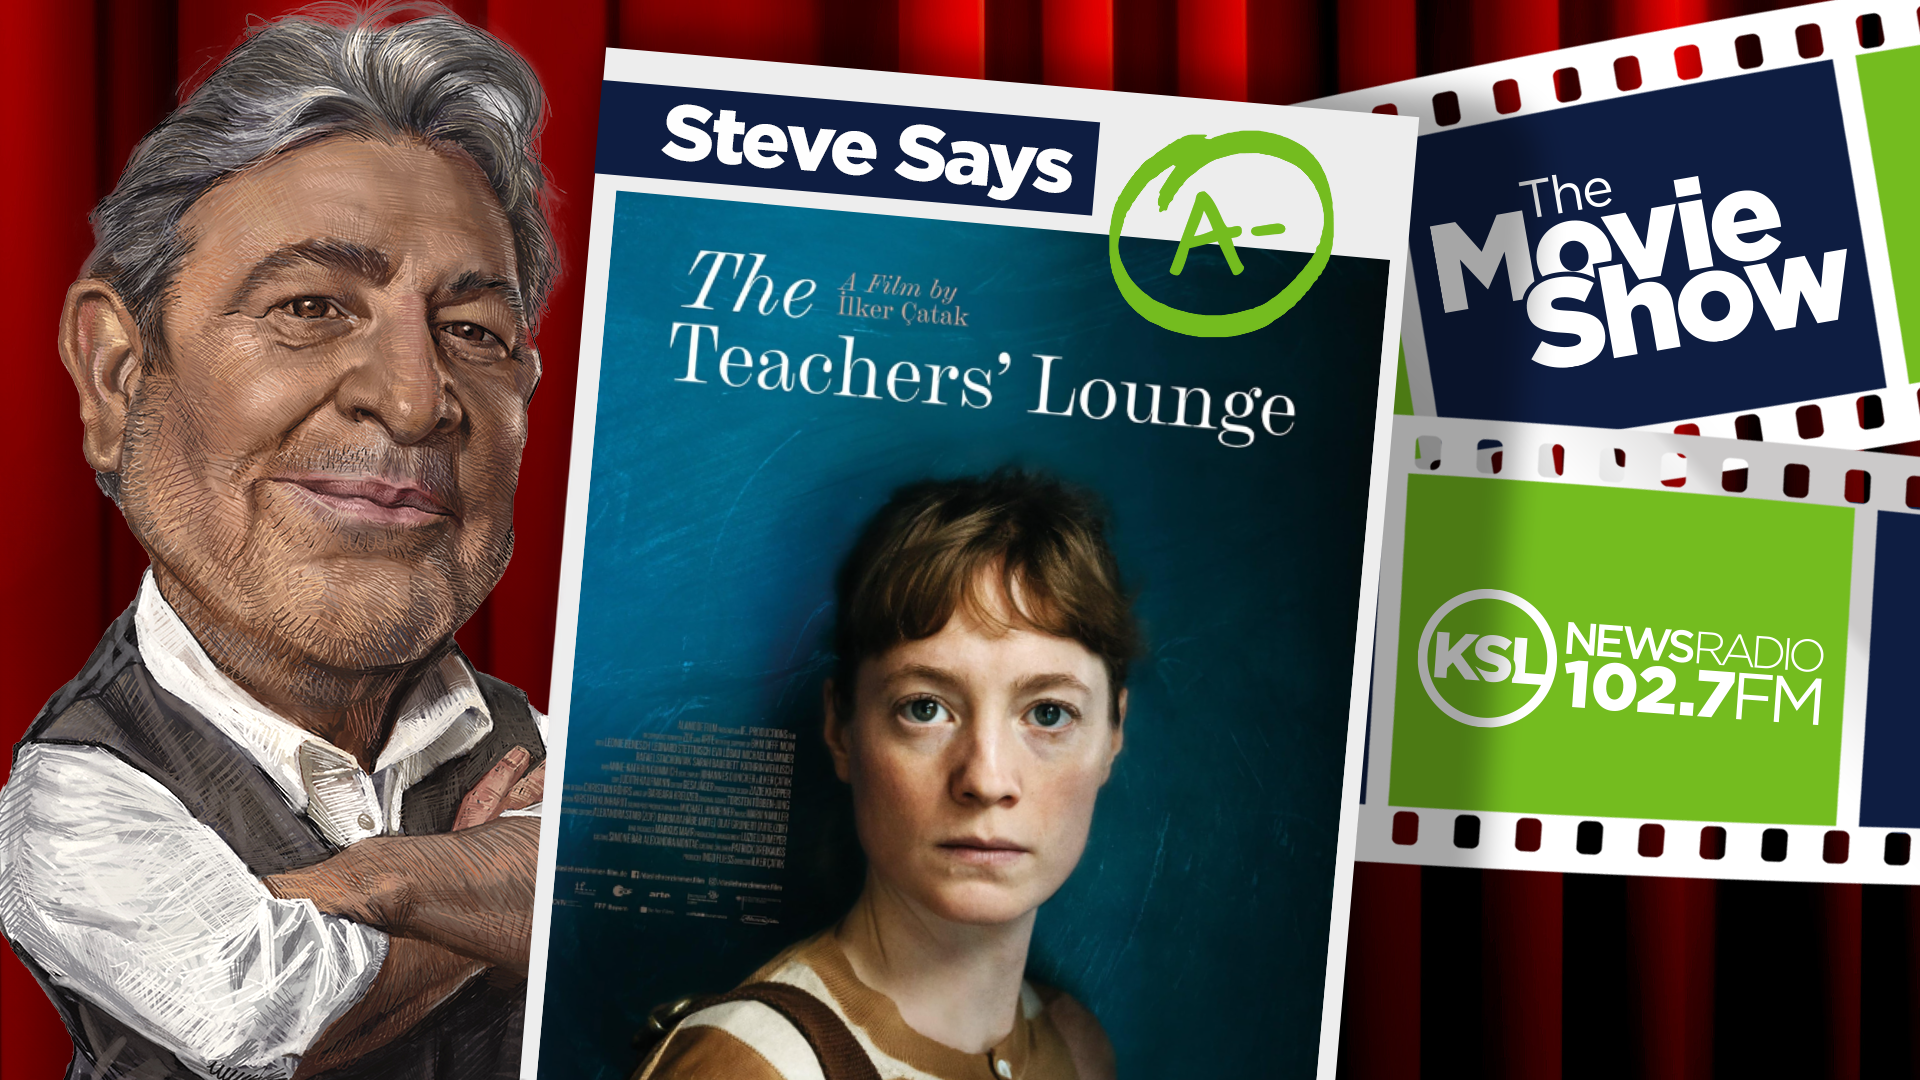 ksl movie show review shows steve salles and teacher's lounge poster...